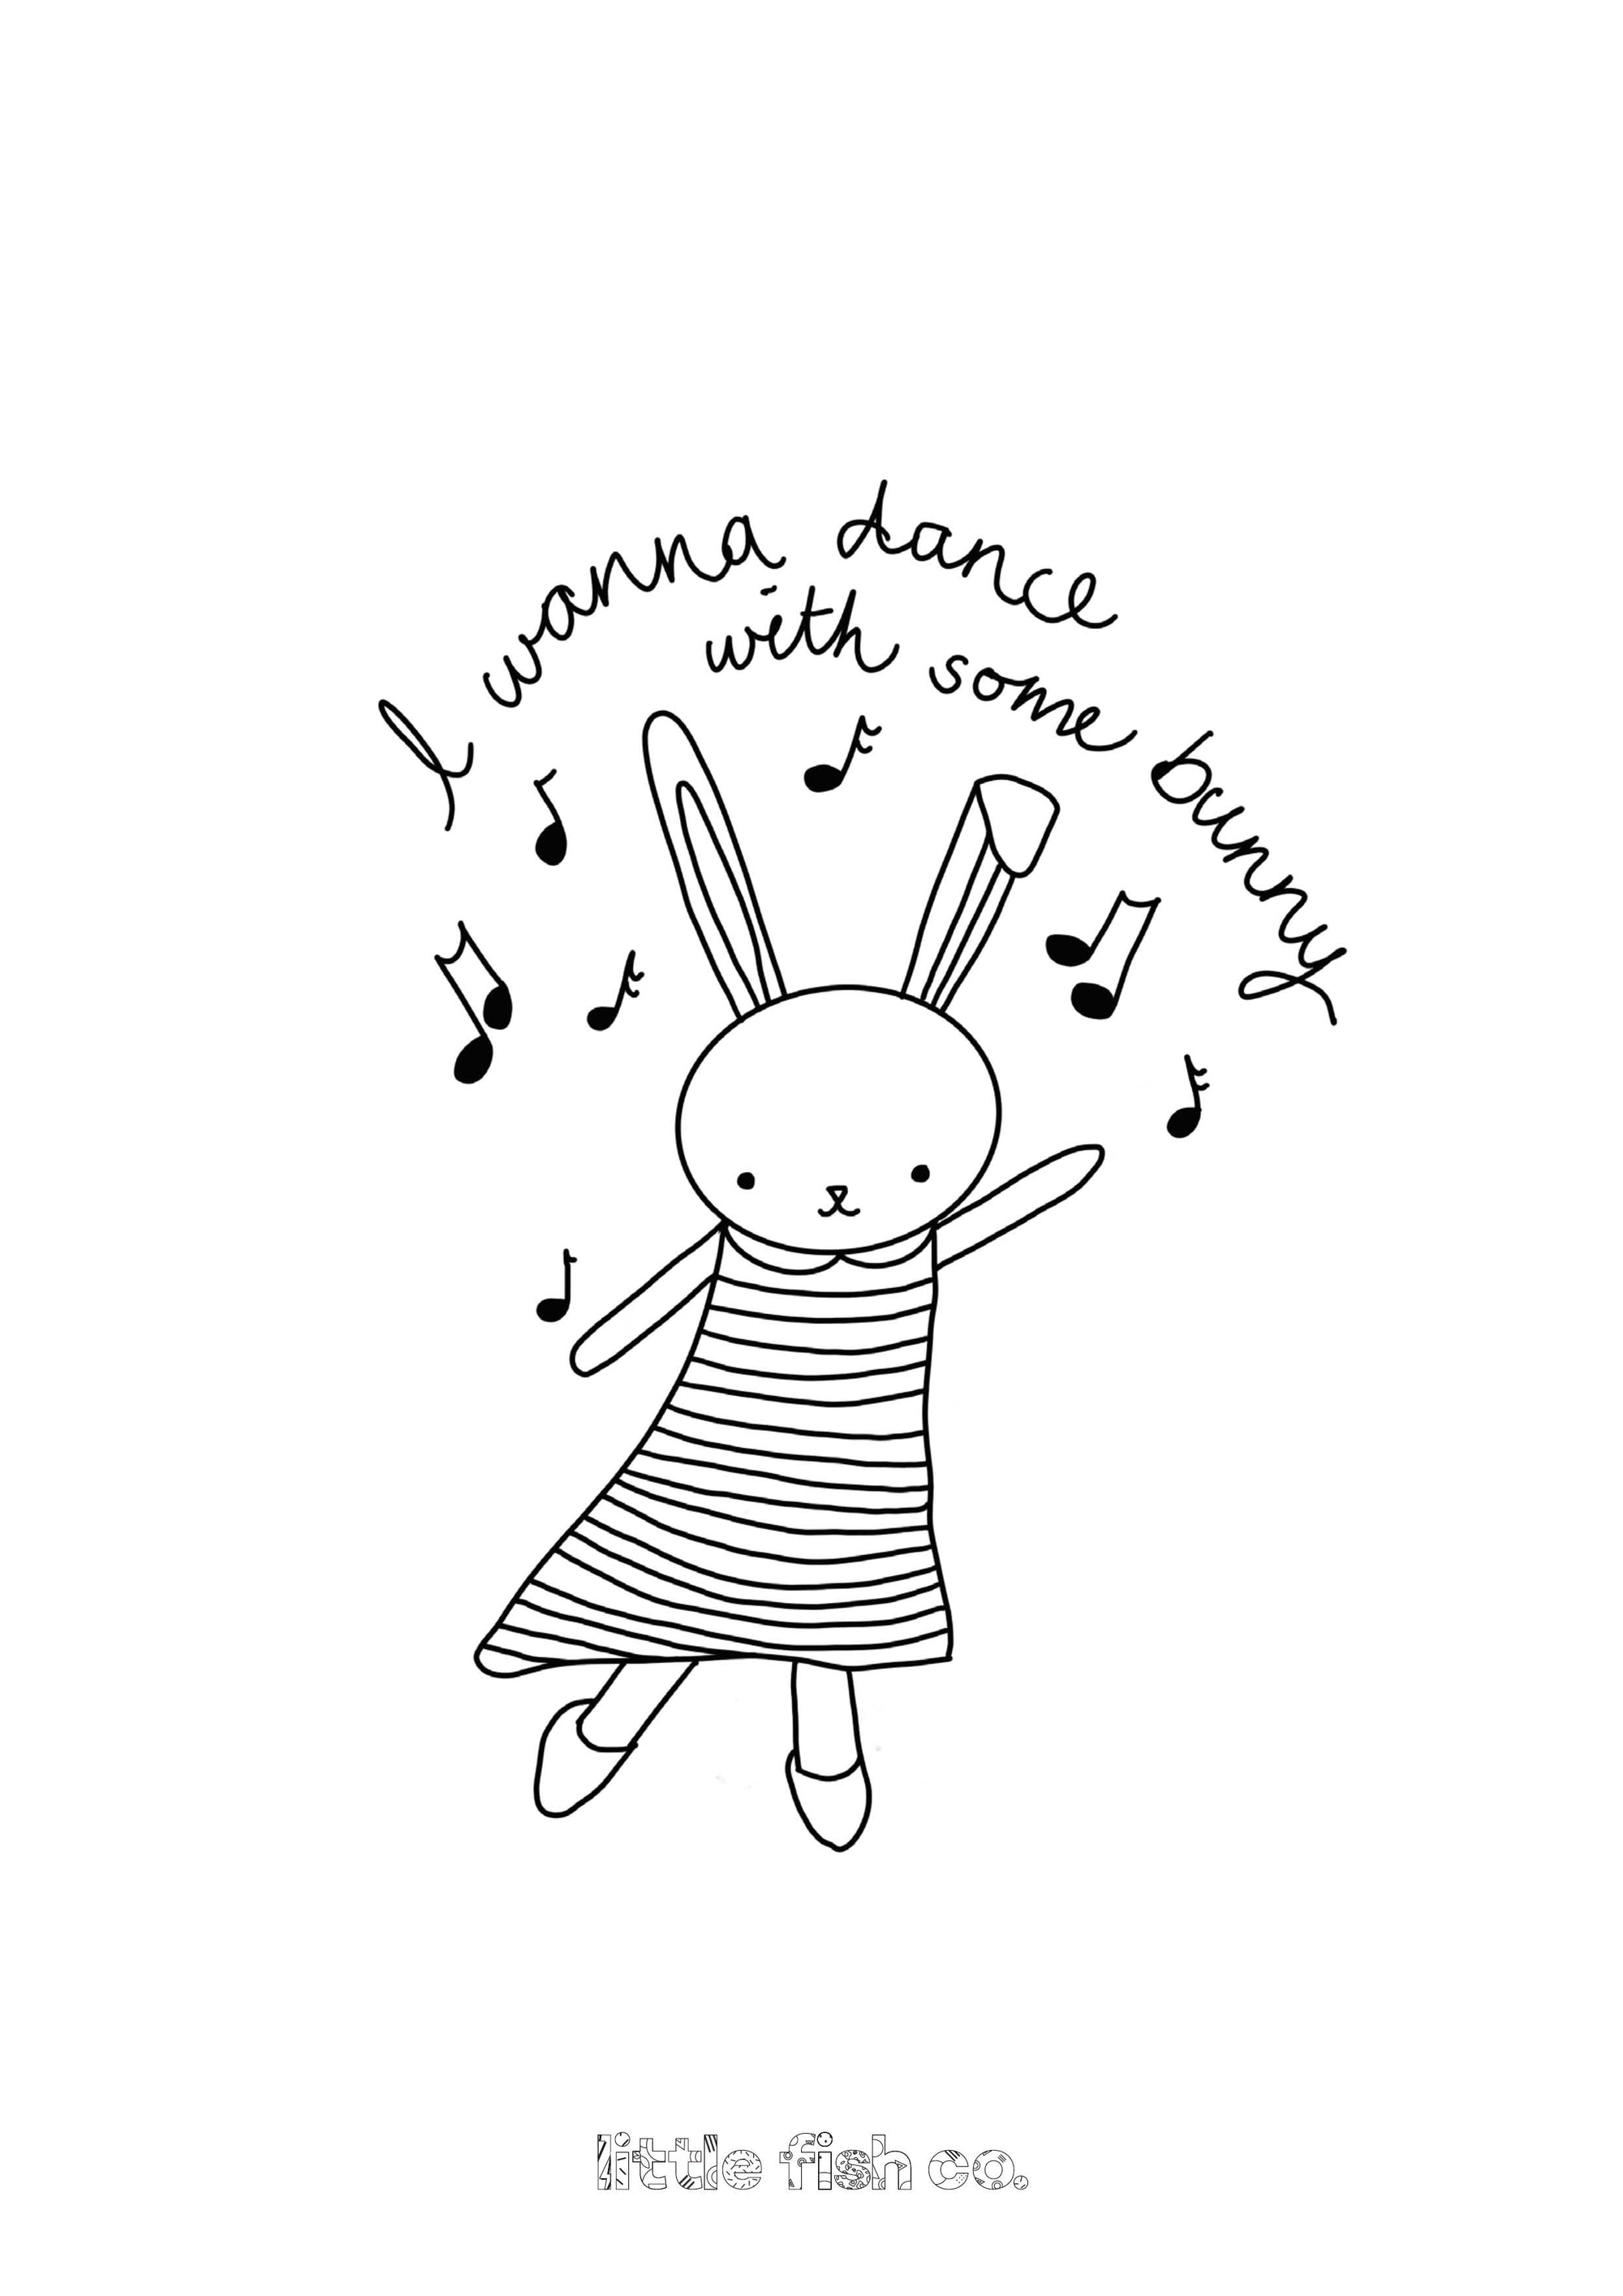 I wanna dance with some bunny- colouring in sheet-Little Fish Co.